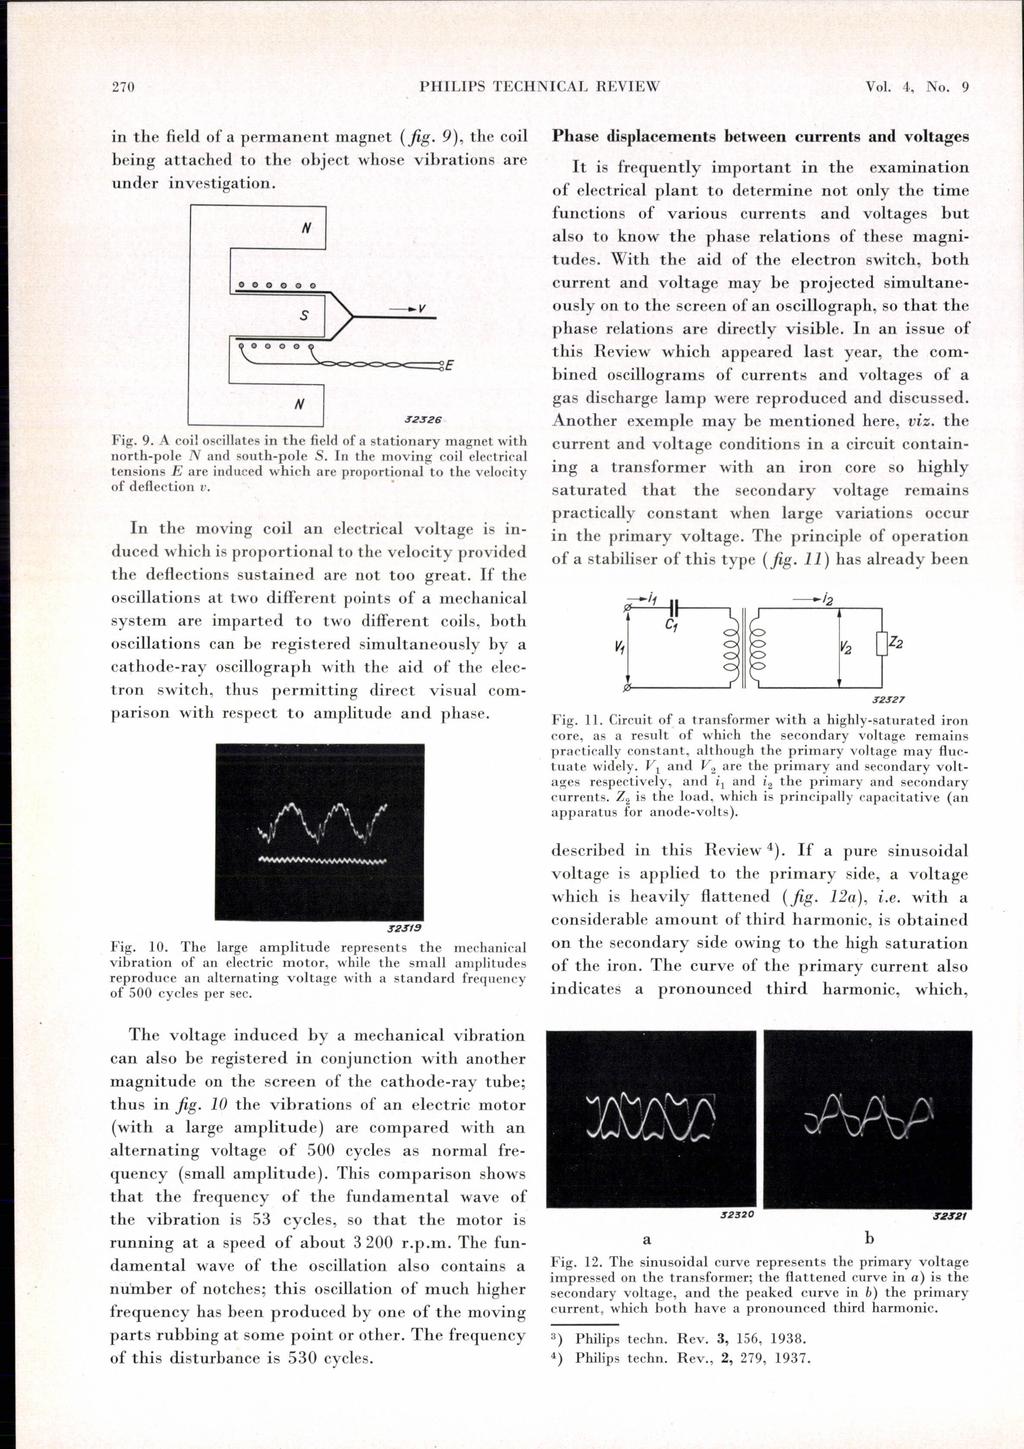 270 PHILIPS TECHNICAL REVIEW Vol. 4, No. 9 in the field of permnent mgnet (fig. 9), the coil eing ttched to the oject whose virtions re under investigtion. Fig. 9. A coil oscilltes in the field of sttionry mgnet with north-pole N nd south-pole S.